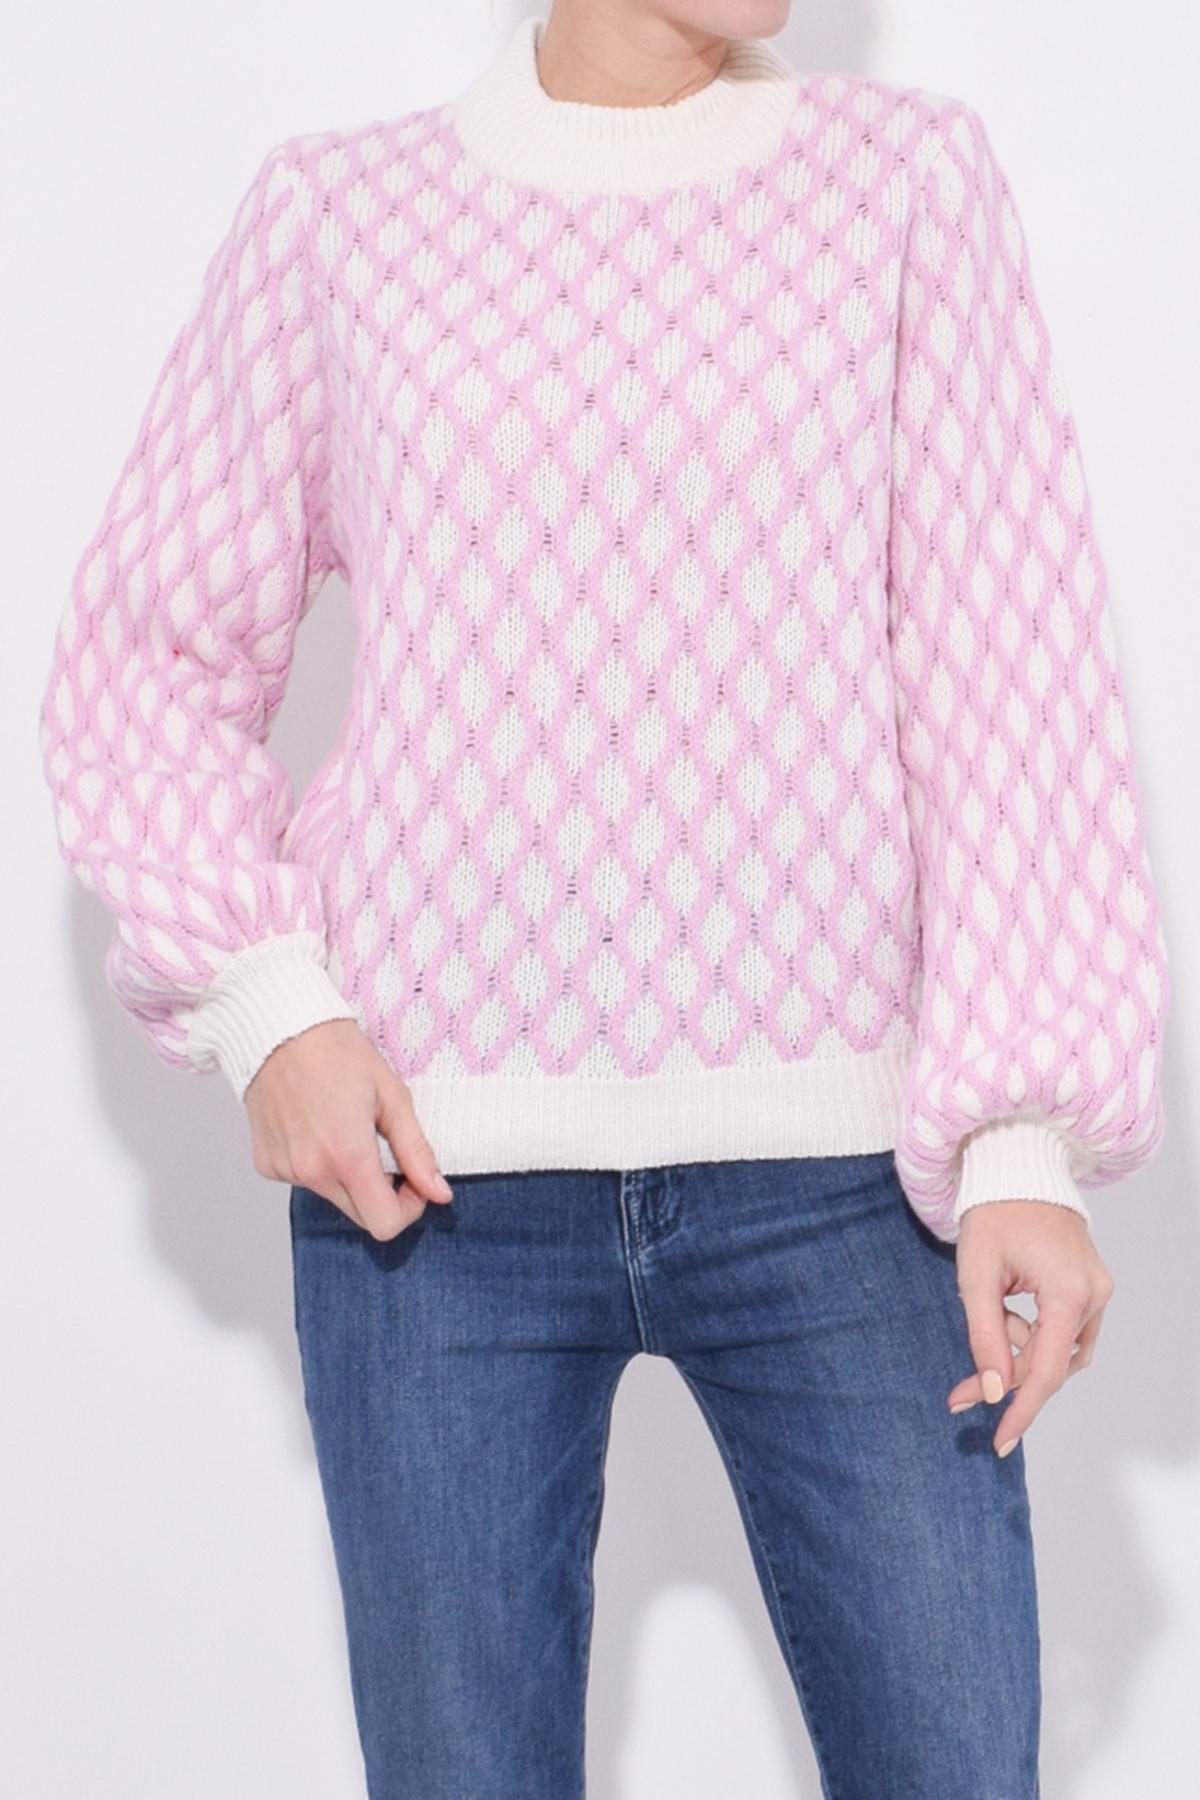 Stine Goya Carlo Cable Knit Wool-blend Sweater in Pink | Lyst